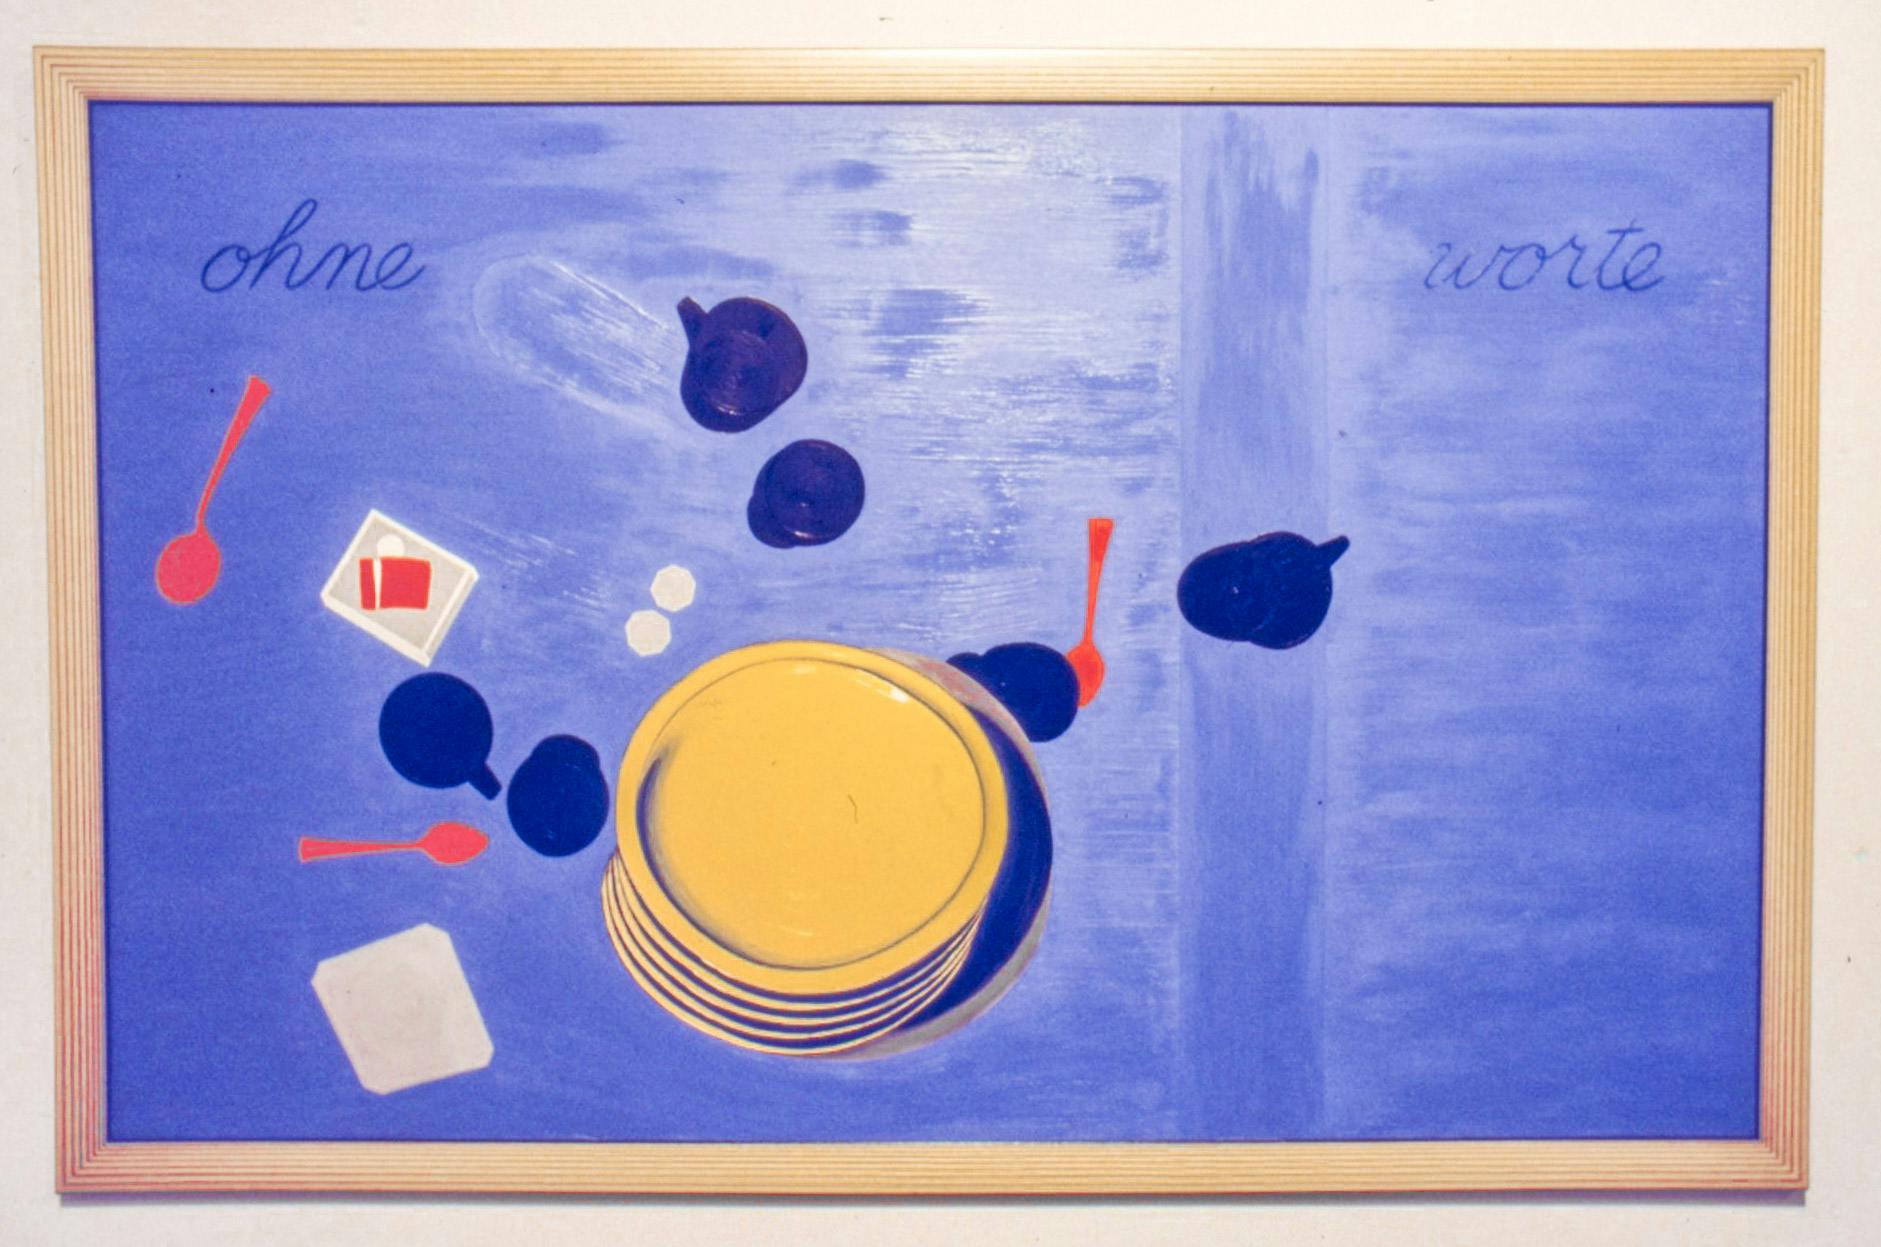 A closeup of a painting in a wood frame. It shows yellow plates, blue cups, and red spoons on a purple background.  Text on the top corners reads "ohne worte" meaning "without words" in German. 